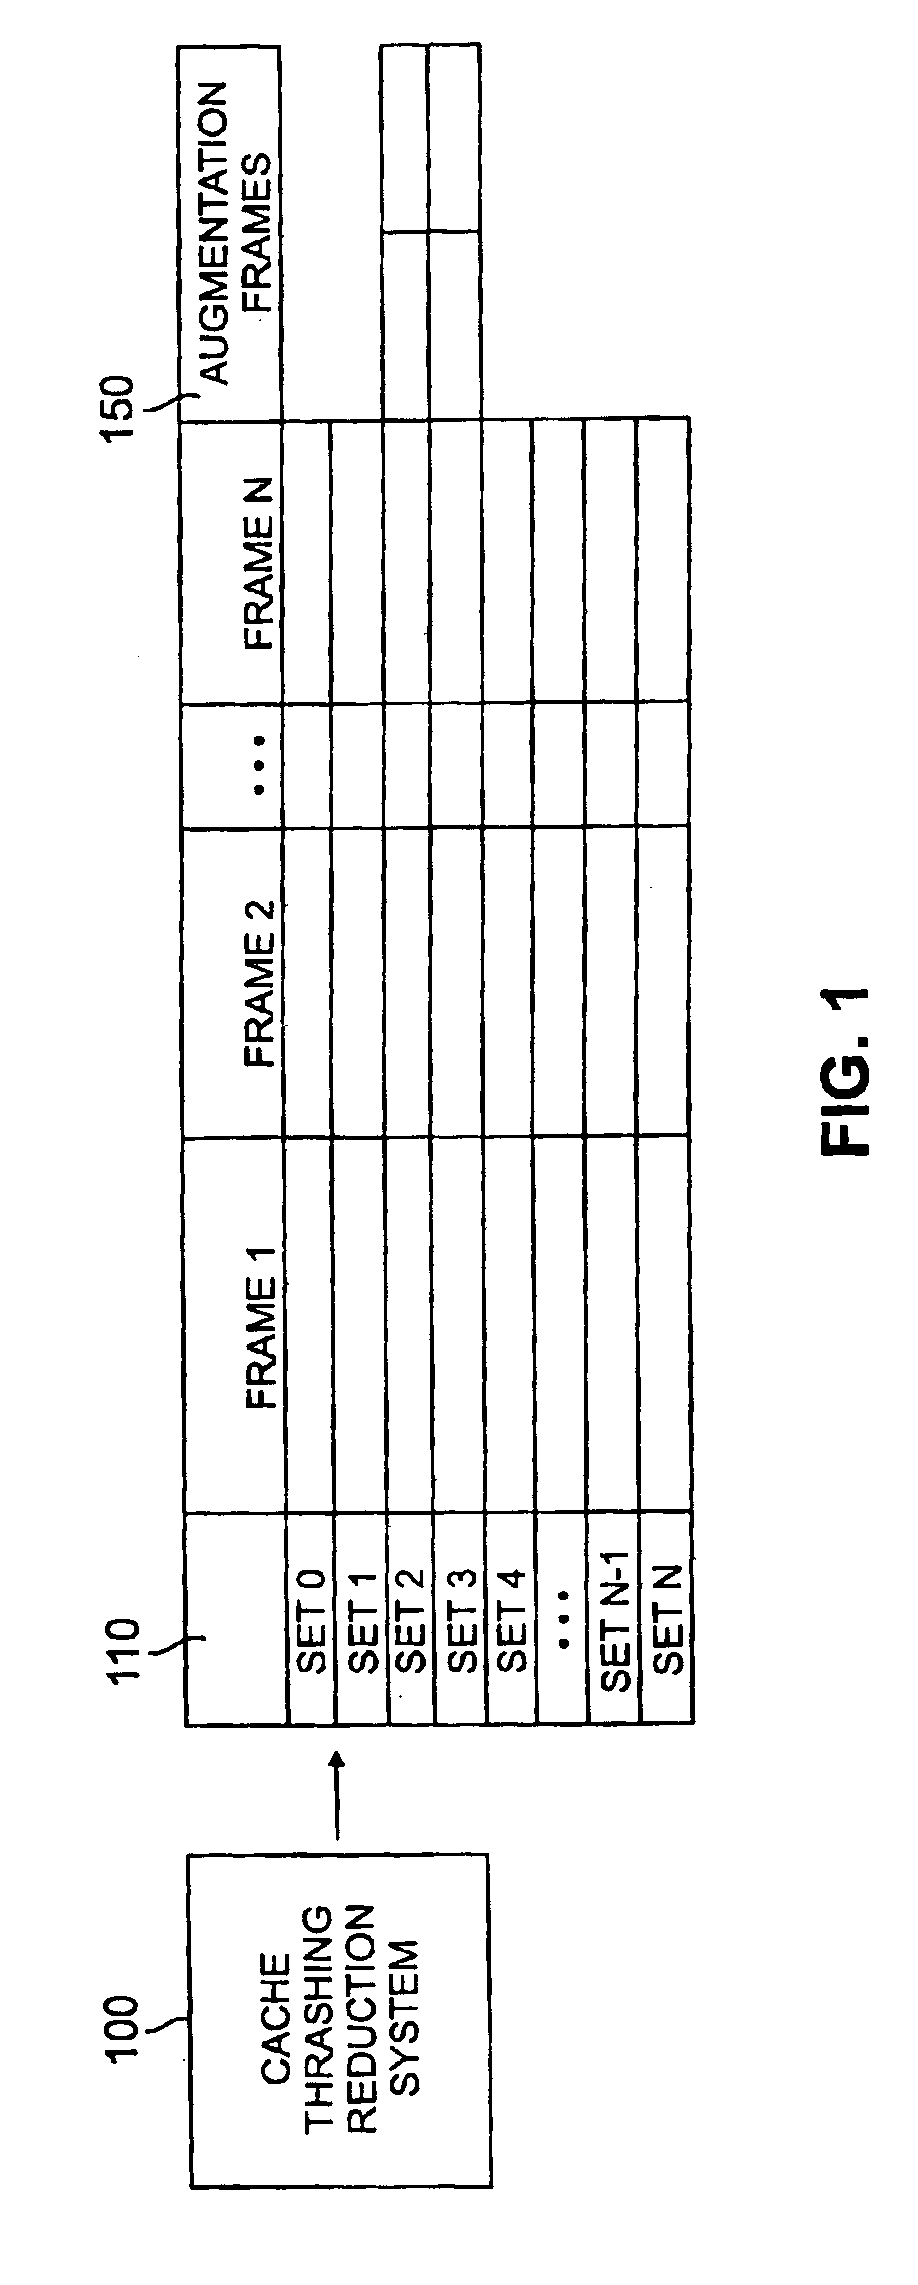 Method and apparatus for reducing cache thrashing